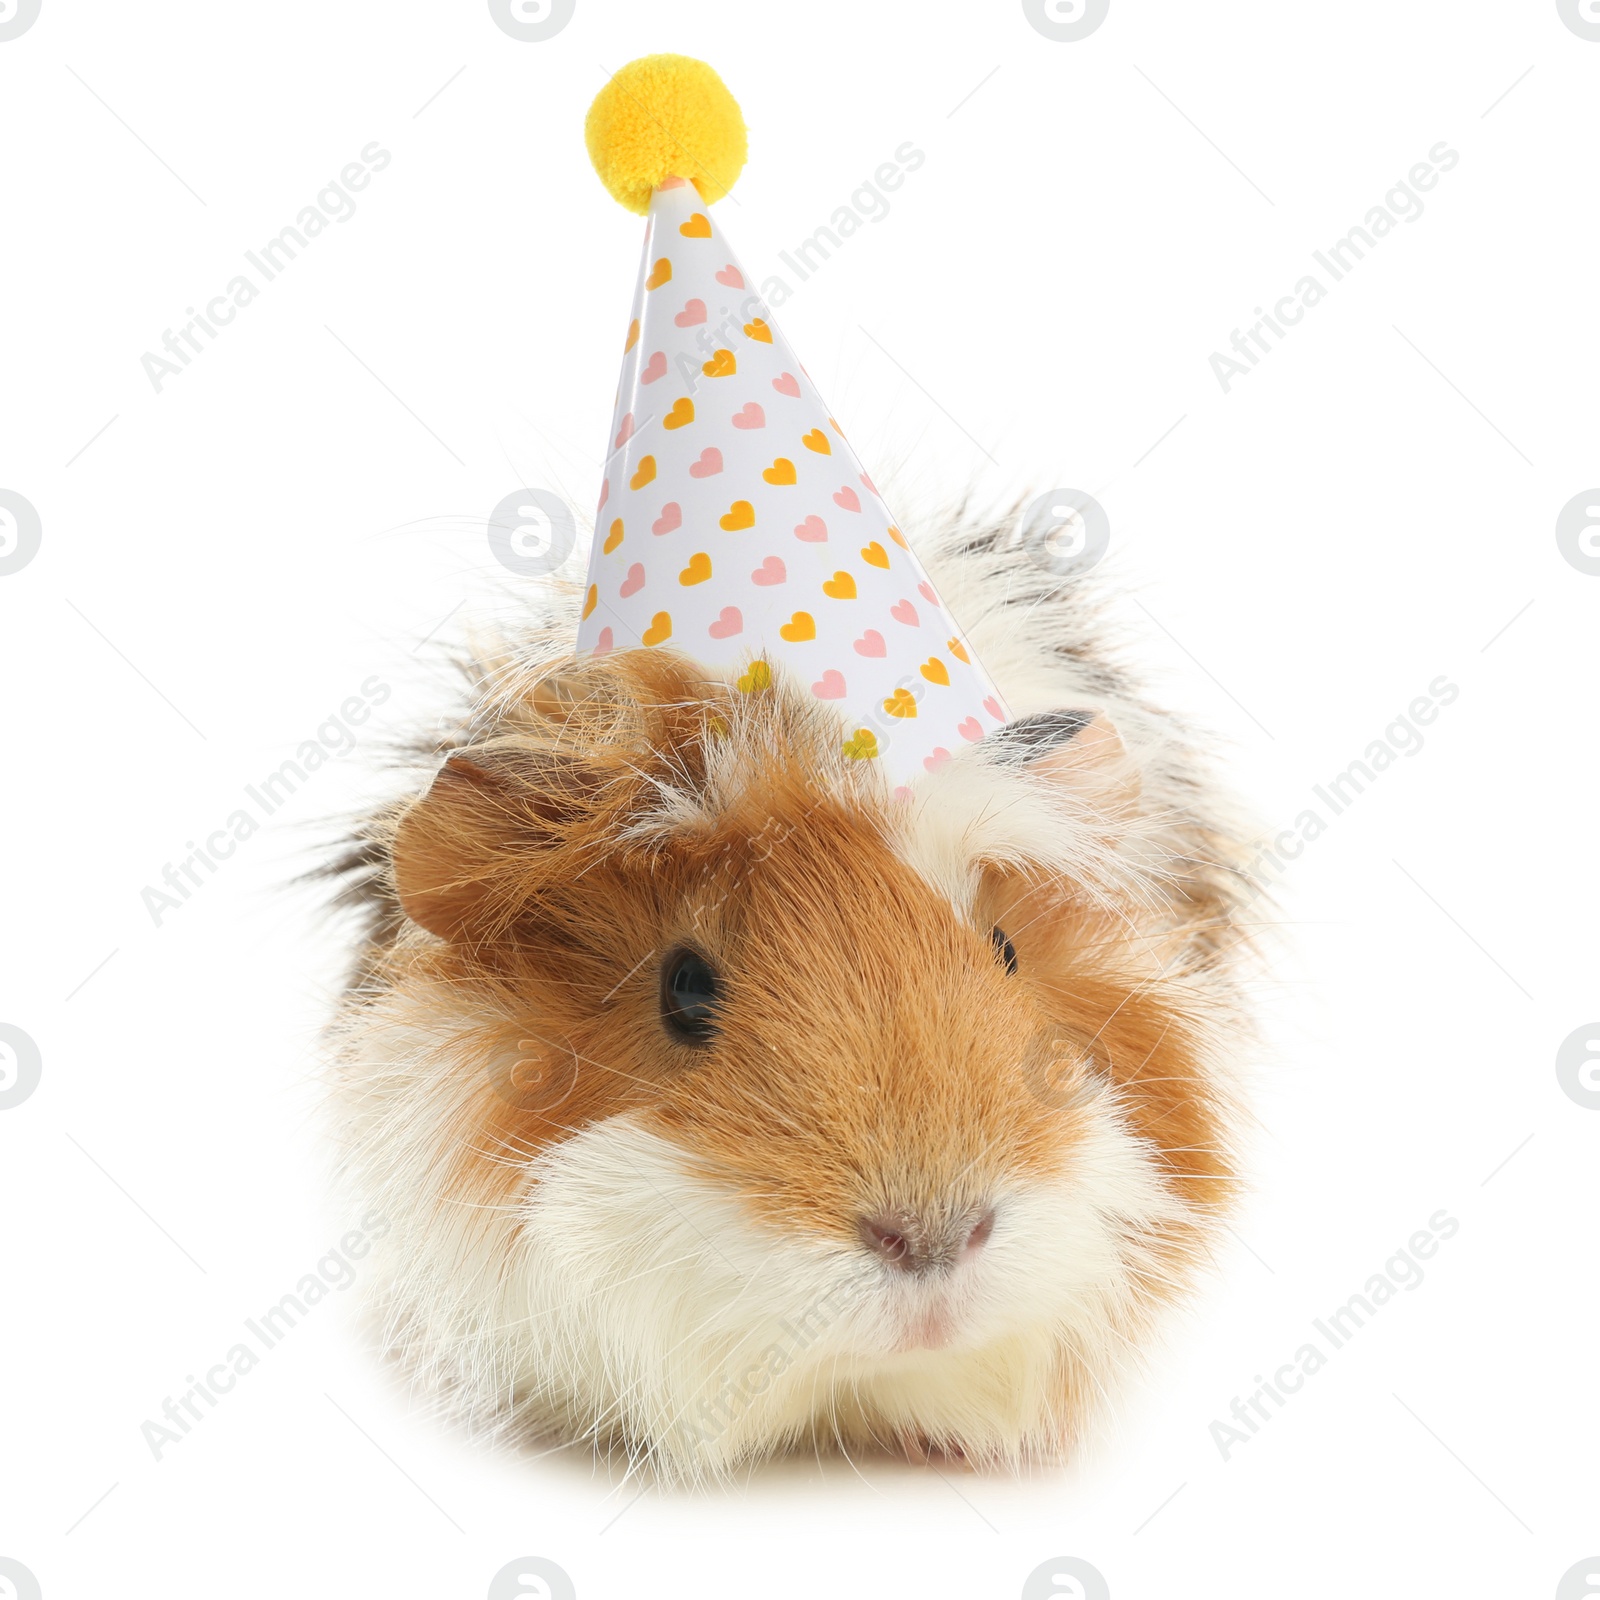 Image of Cute guinea pig with party hat on white background